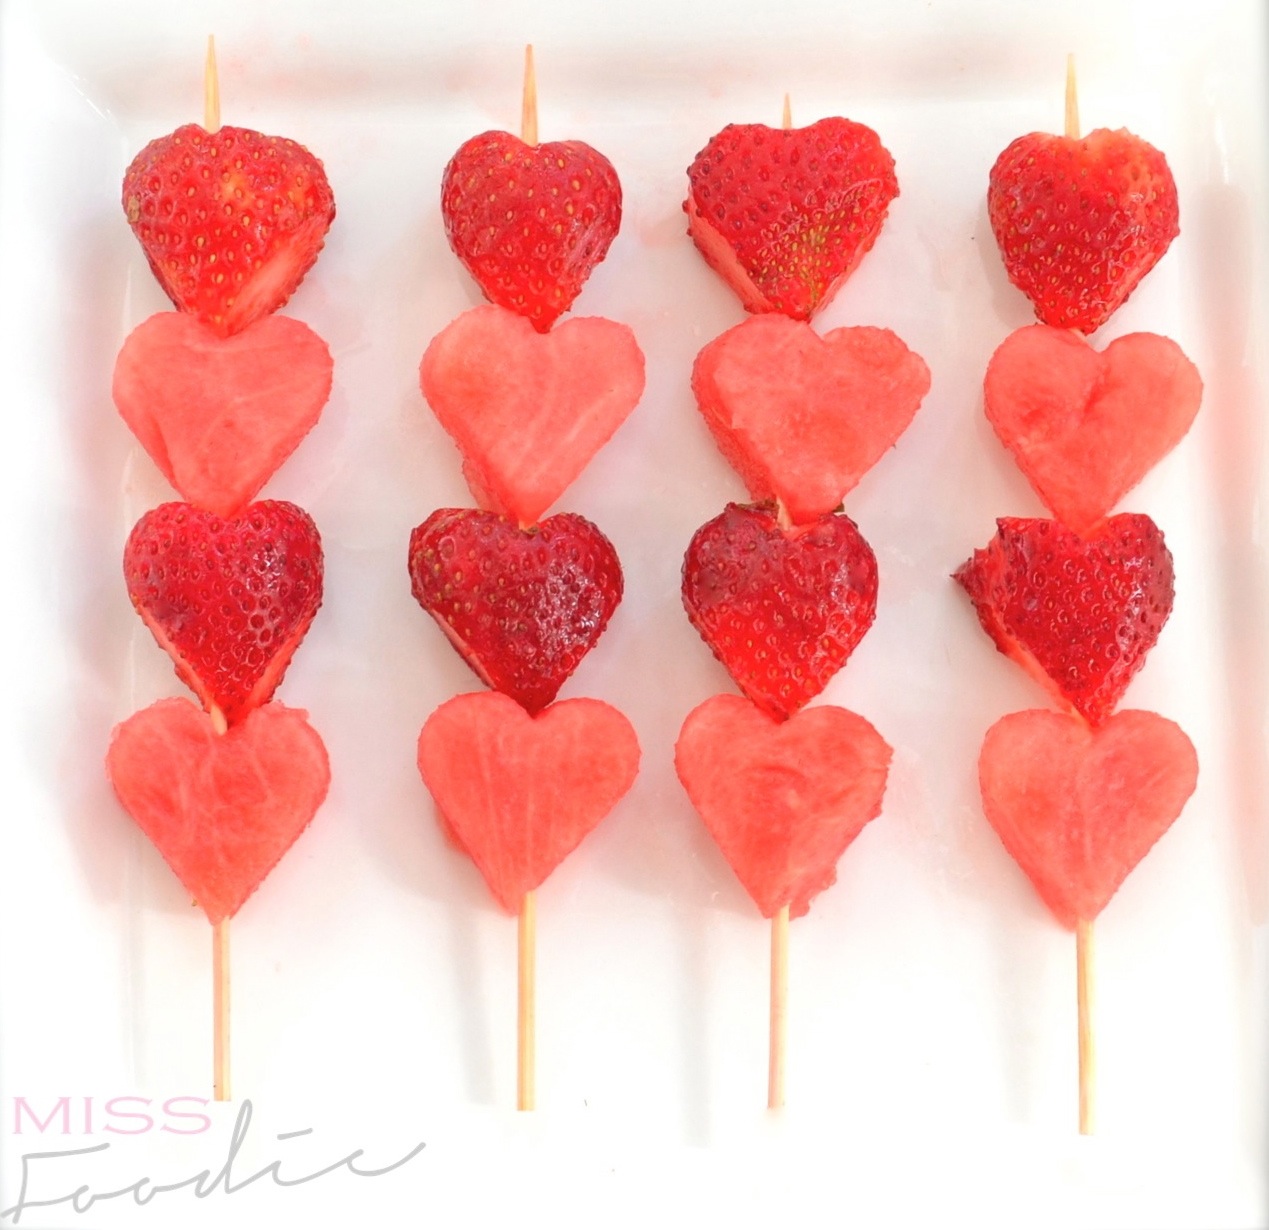 Miss Foodie - Valentines Day - Heart Shaped Food1